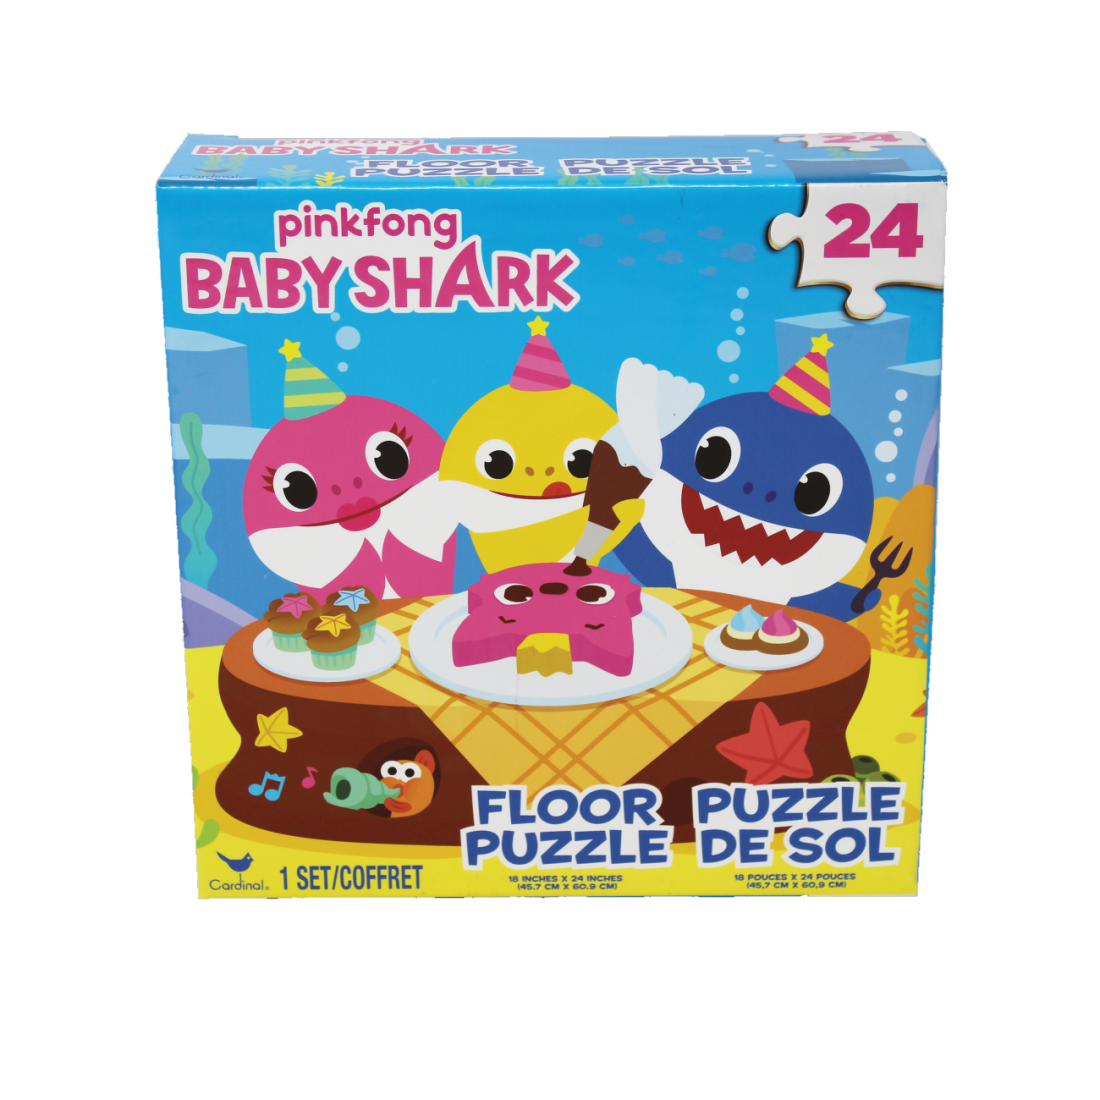 Puzzle - Pinkfong Baby Shark 24 pcs